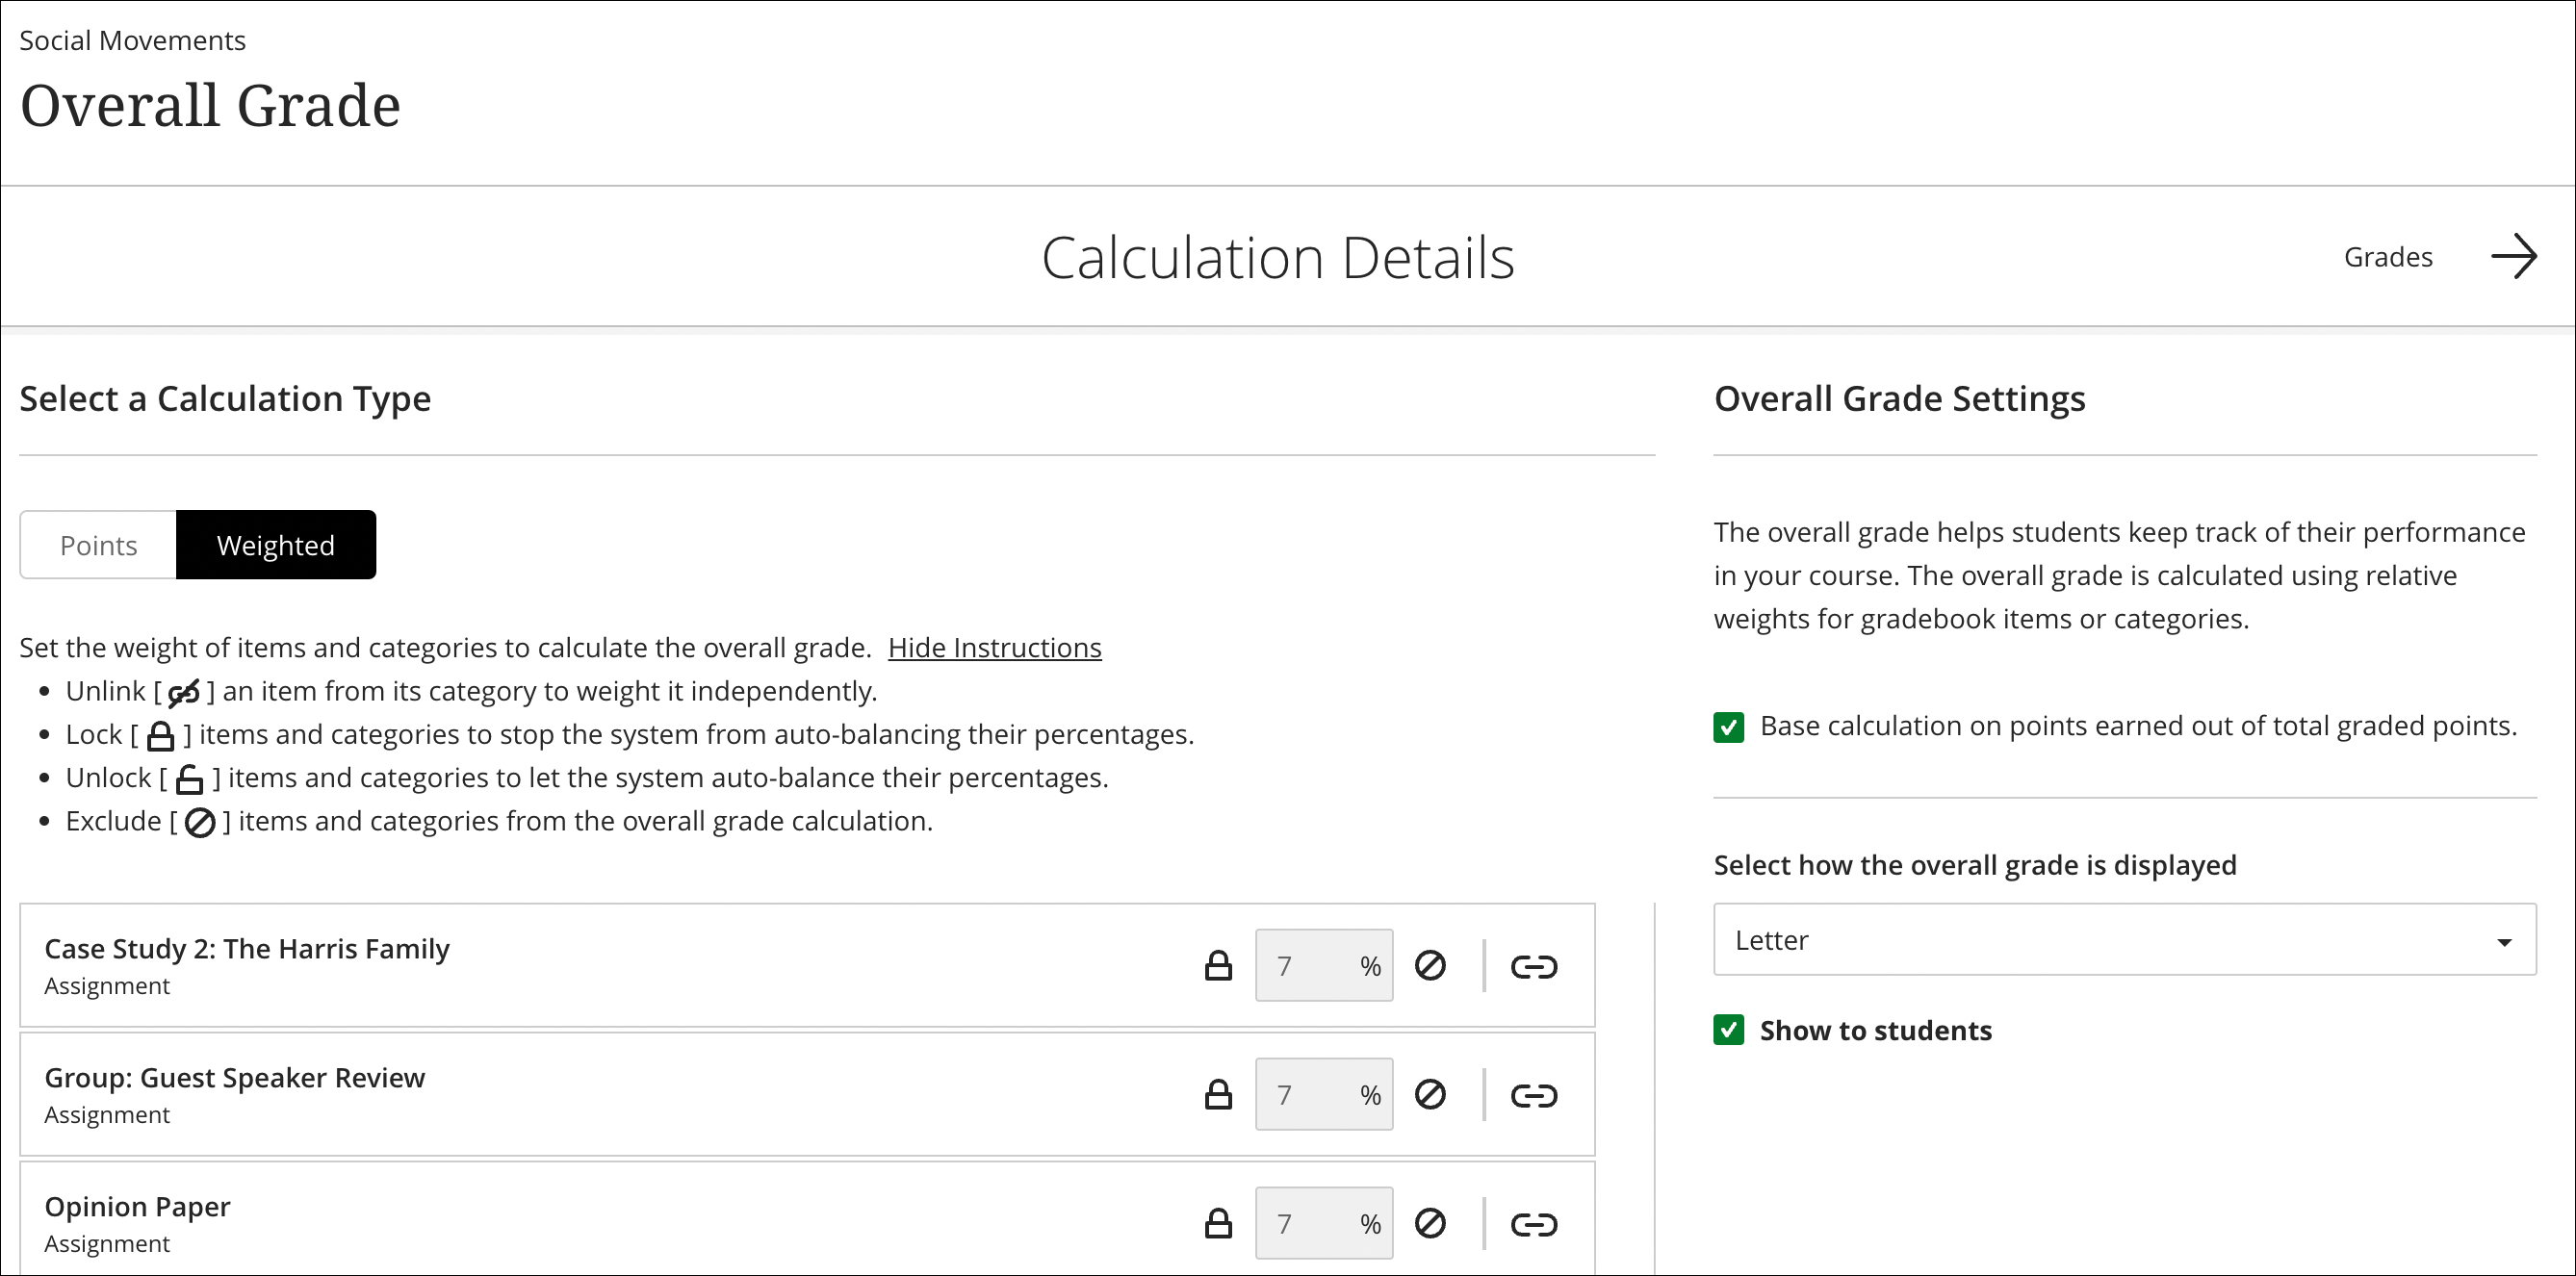 Overall grade page and settings panel